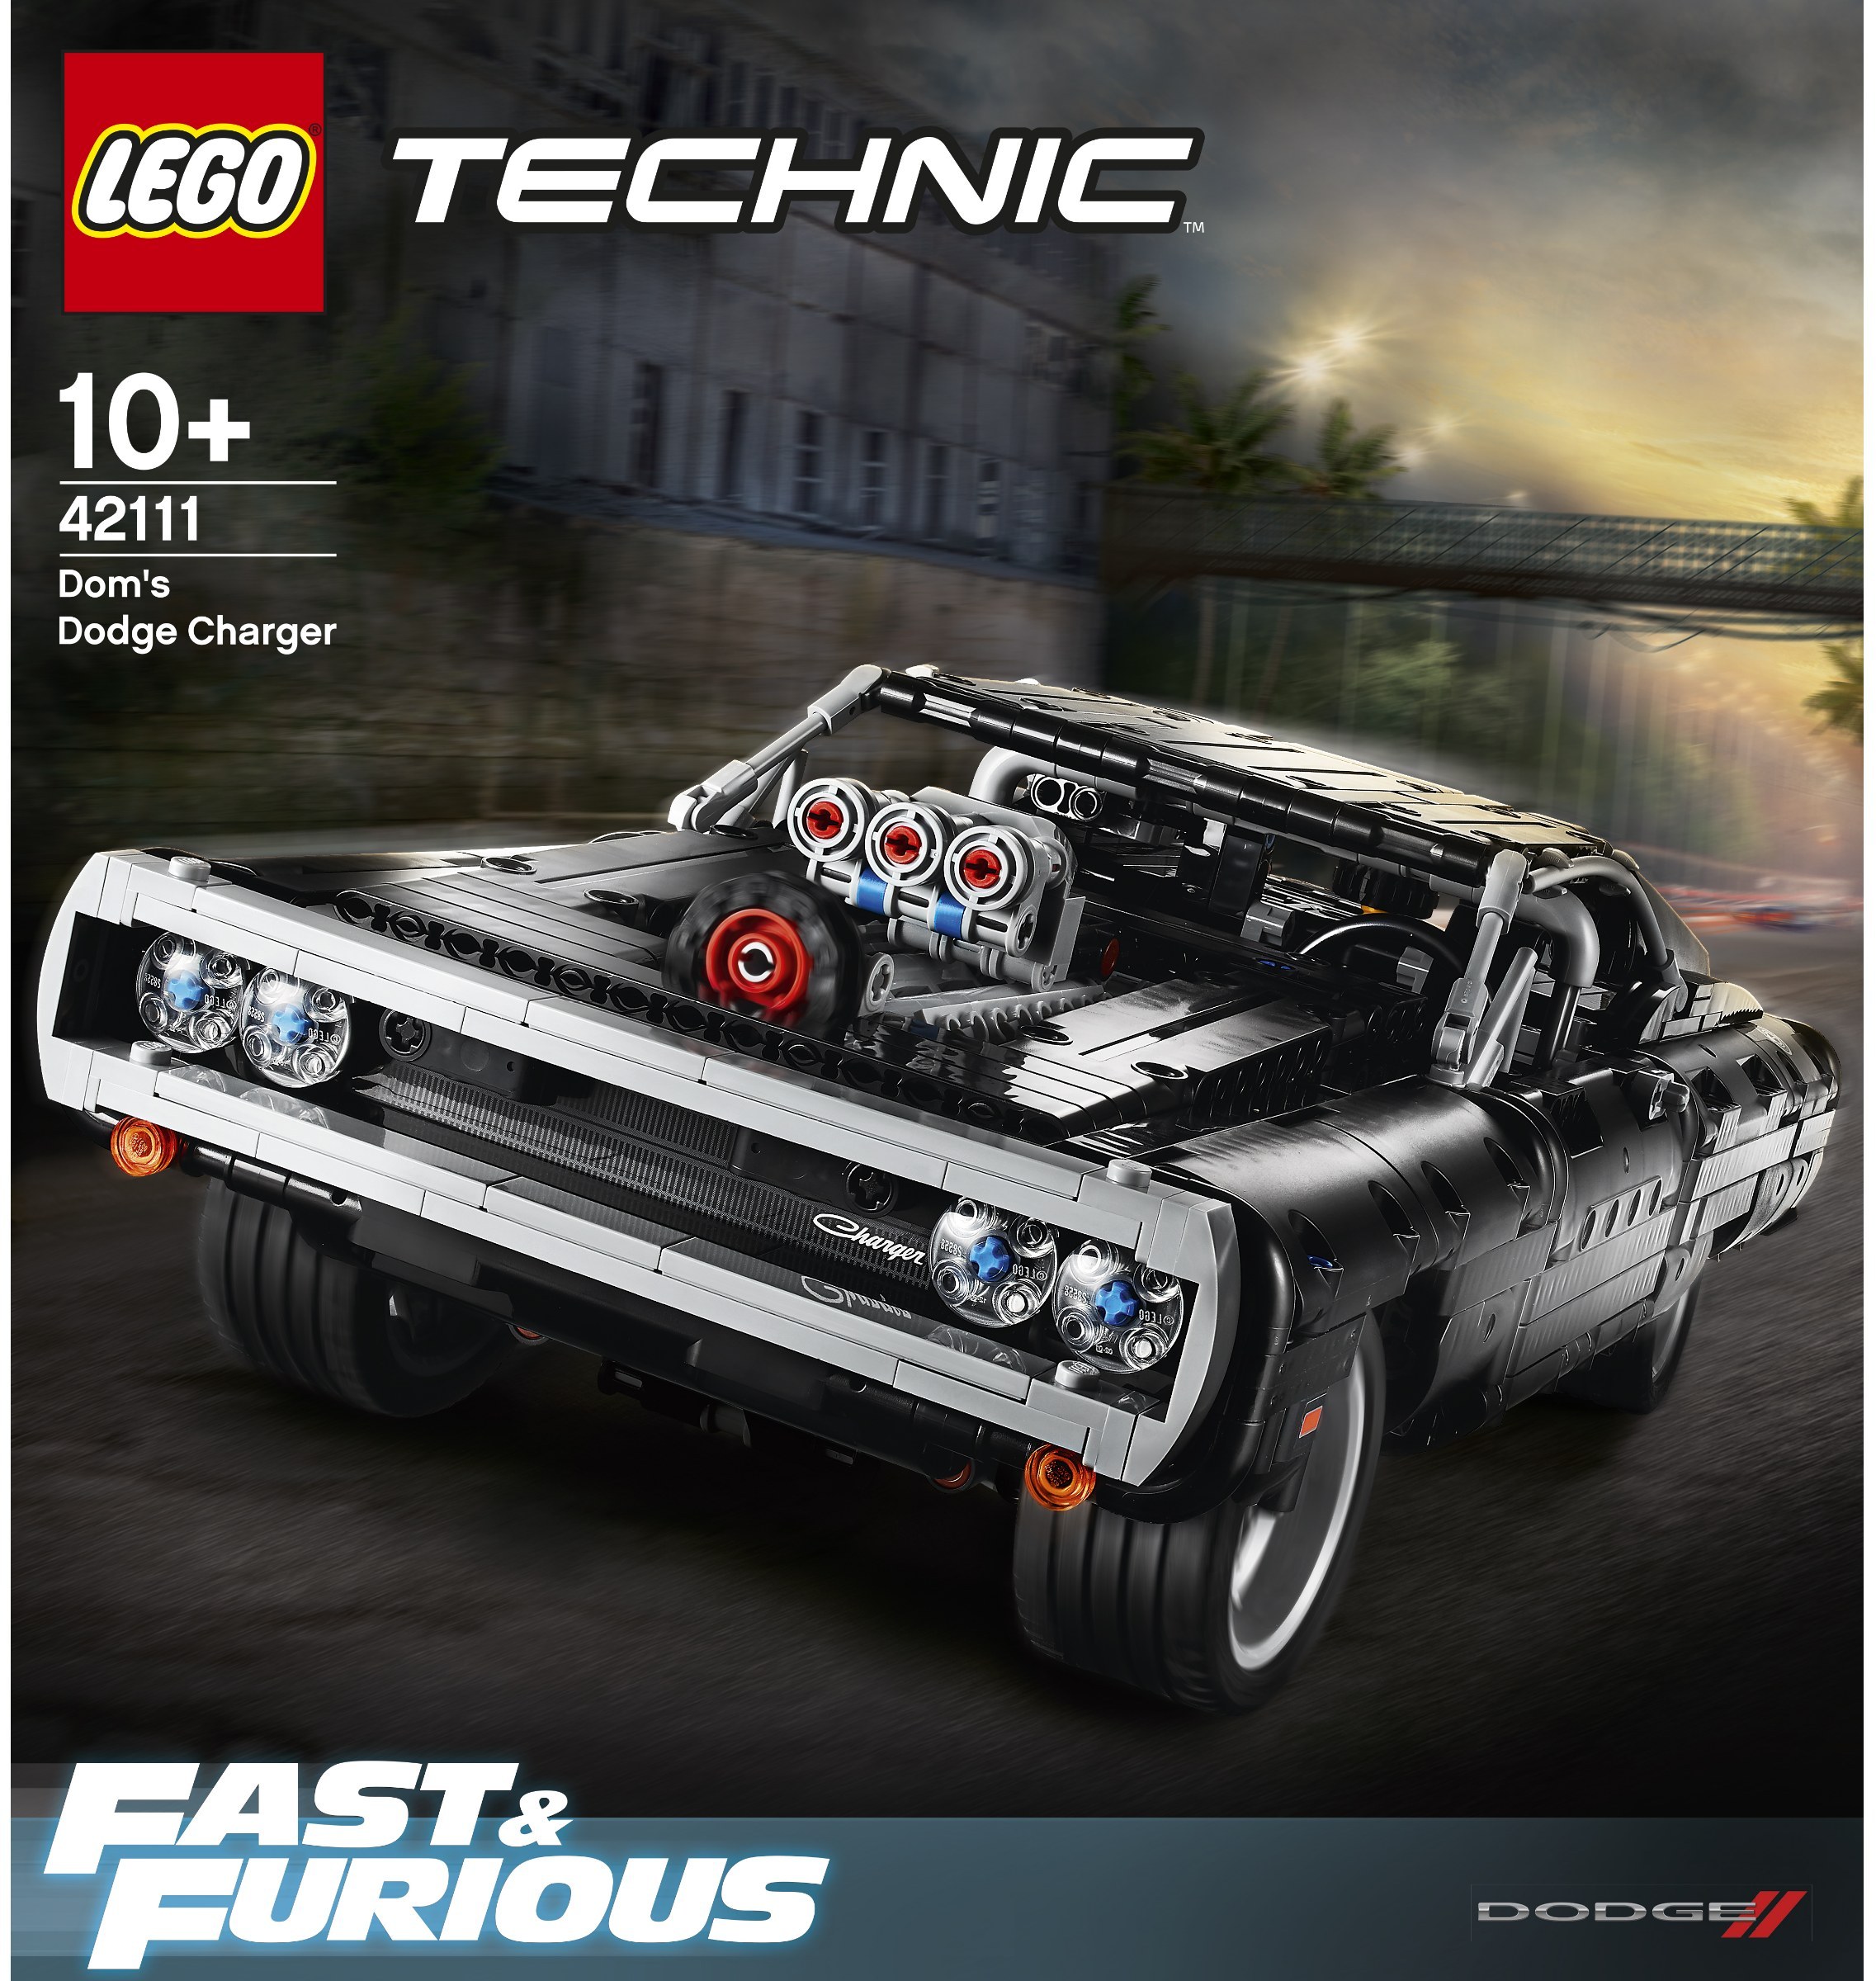 First Fast & Furious set revealed!